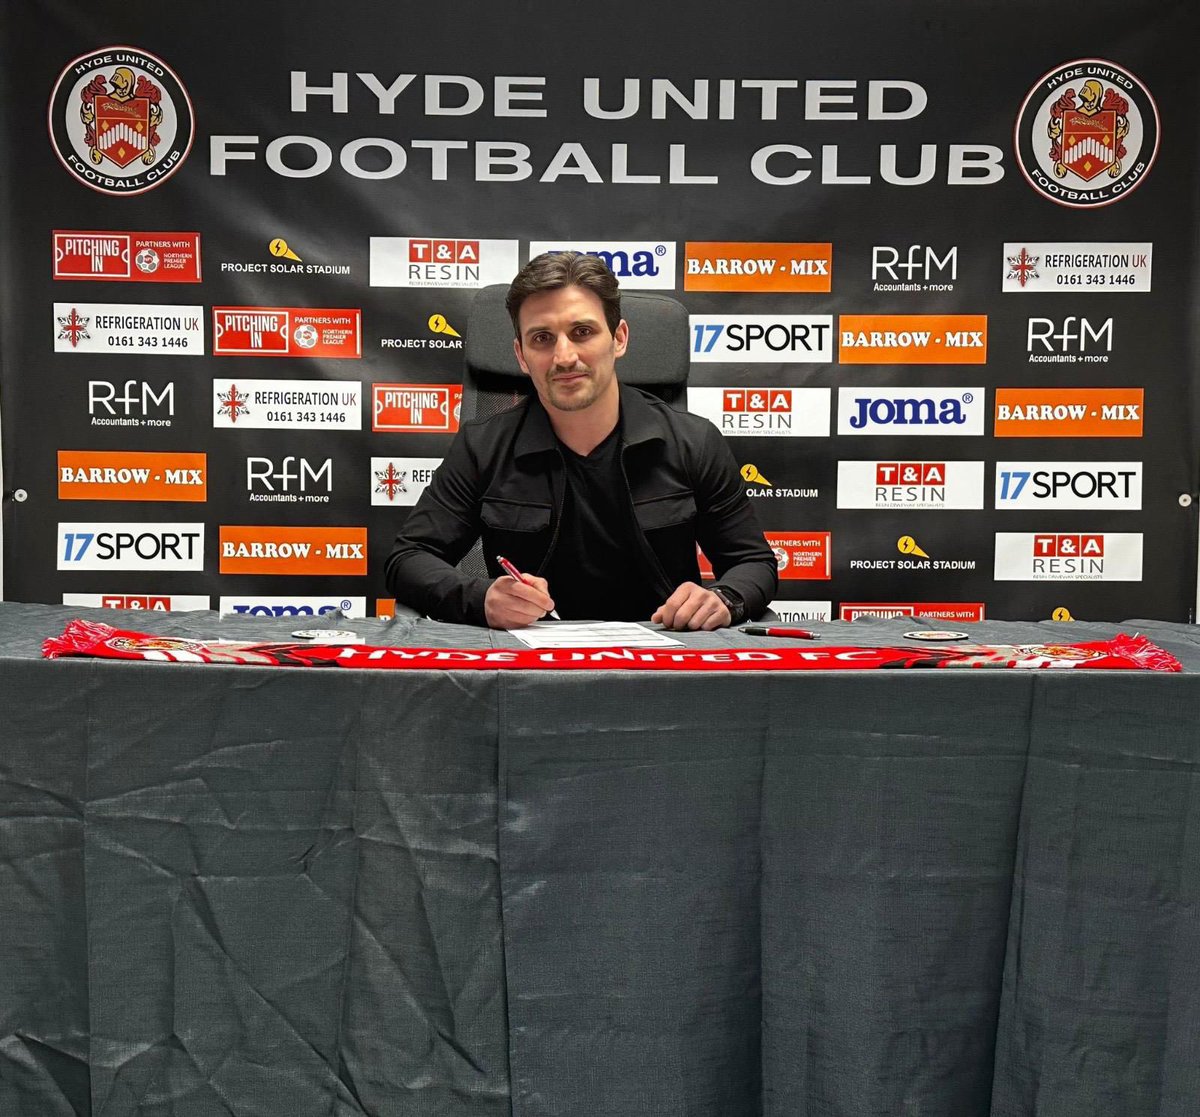 Really happy to extend my stay at this football club for another 2 years ❤️✍🏻 Few weeks to rest and recover before it all starts again. See you all soon ⚽️ @hydeunited